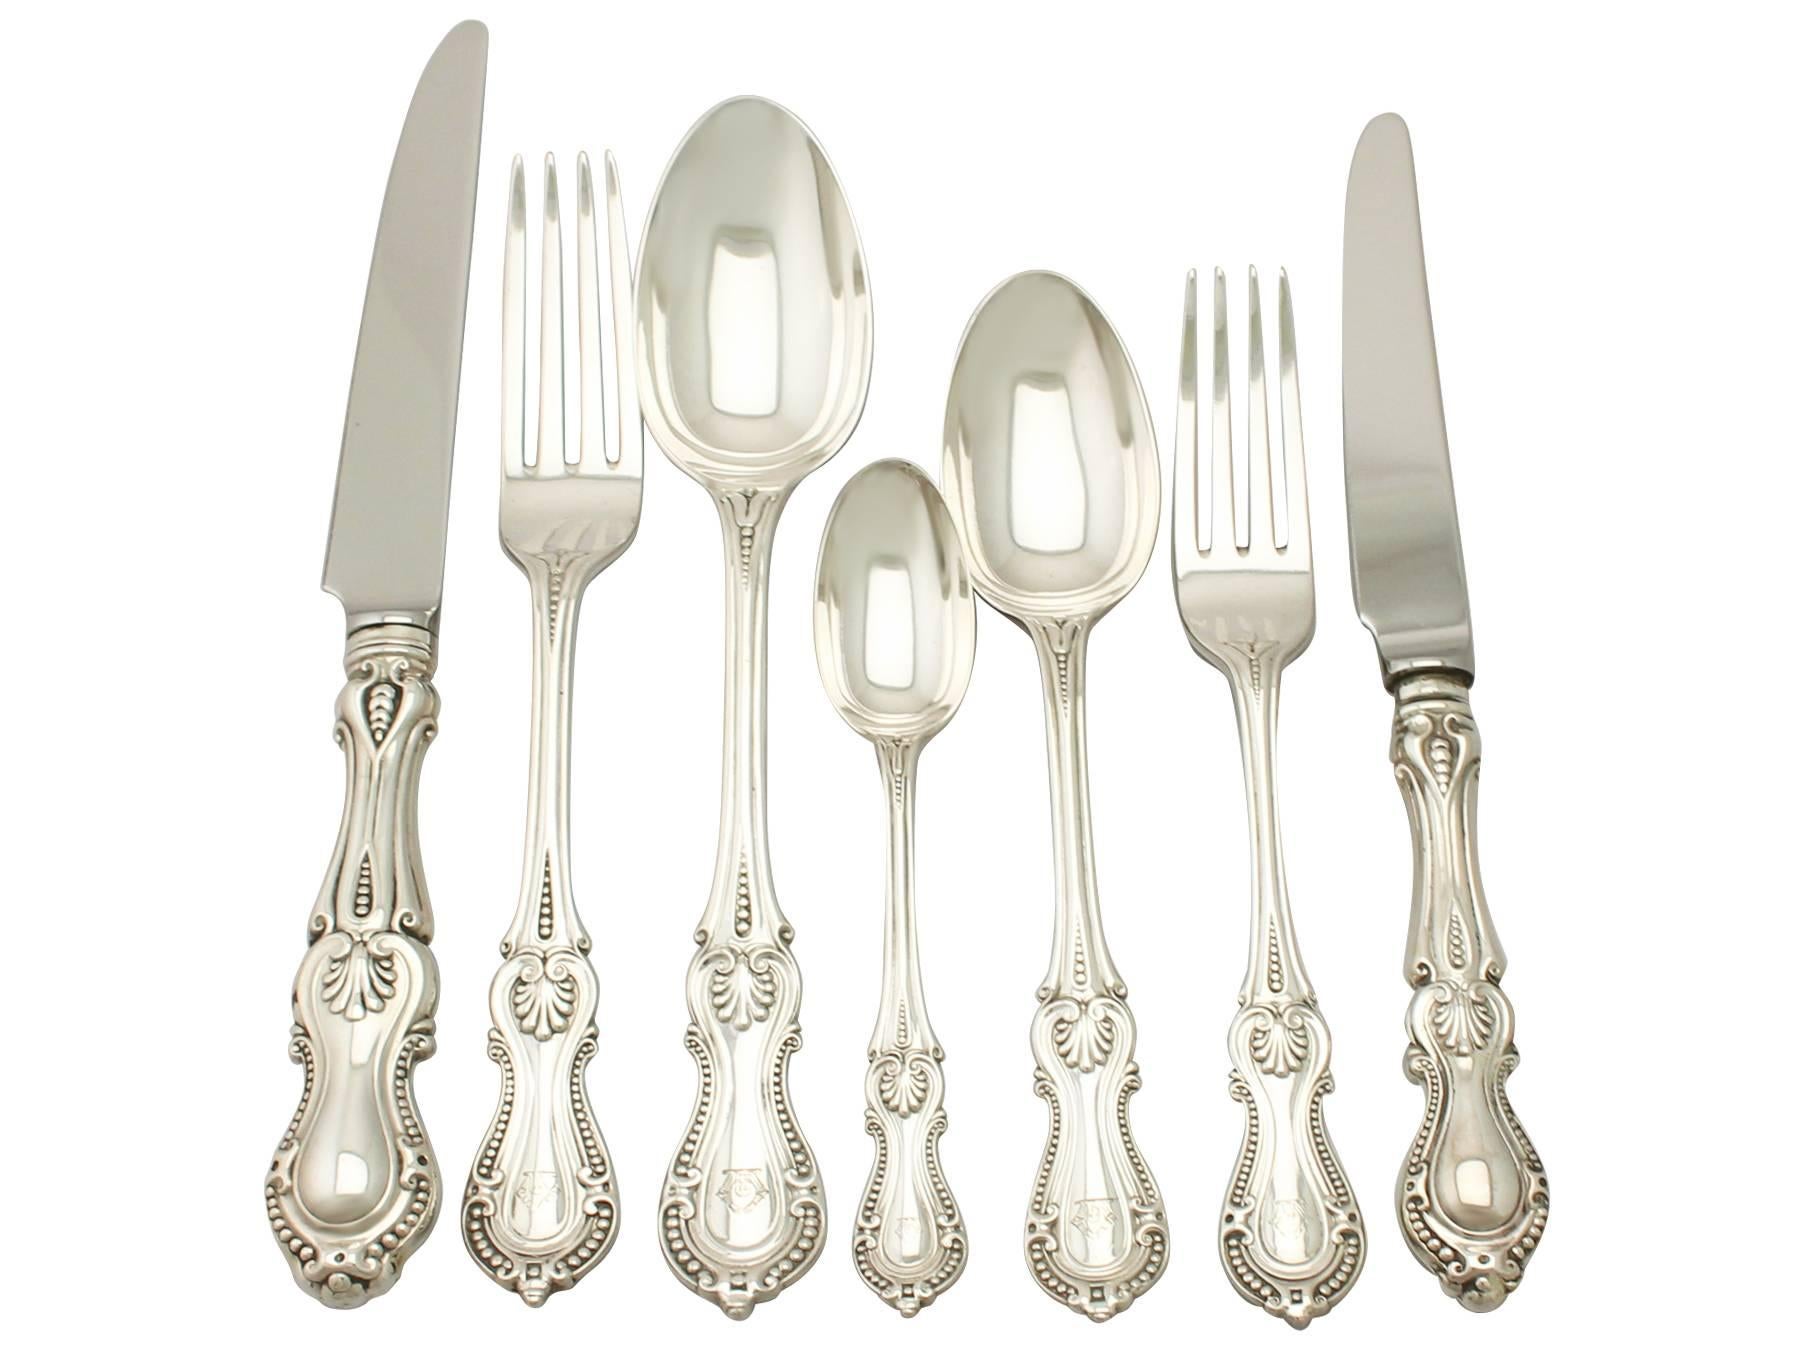 An exceptional, fine and impressive antique Victorian English sterling silver straight rich bead pattern flatware service for eight persons.

The pieces of this fine antique Victorian sterling silver flatware service for eight persons have been